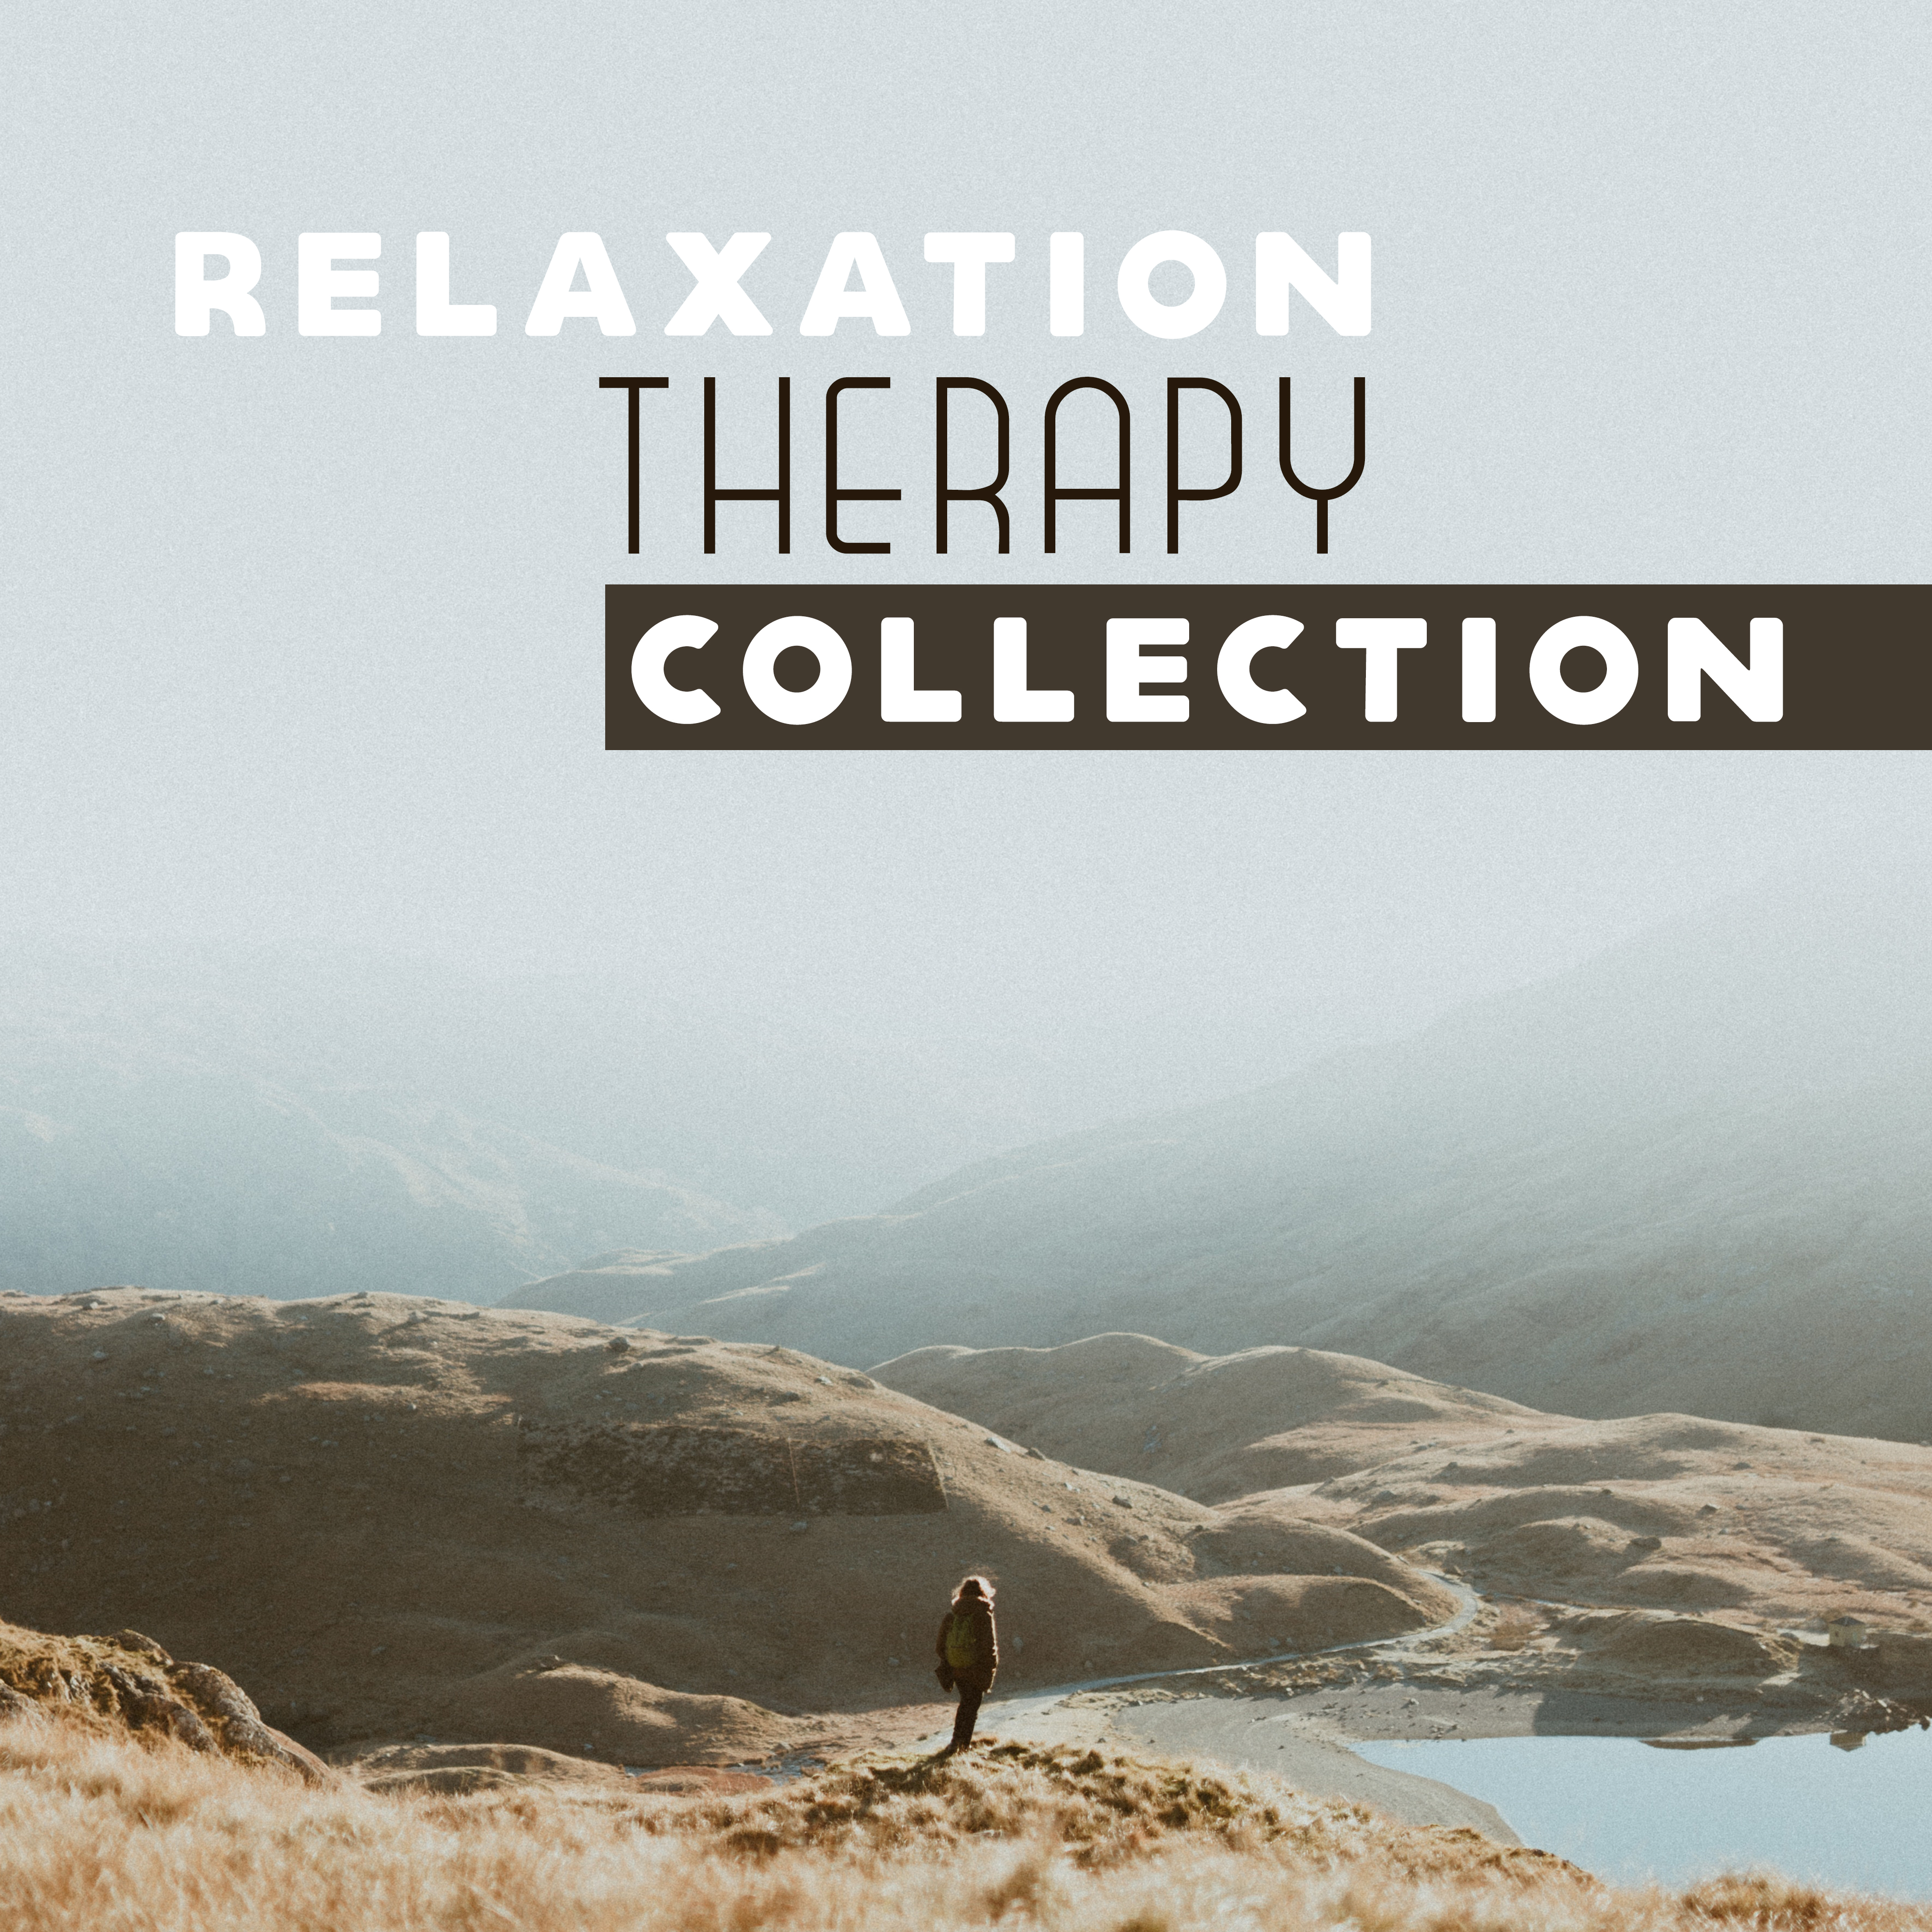 Relaxation Therapy Collection